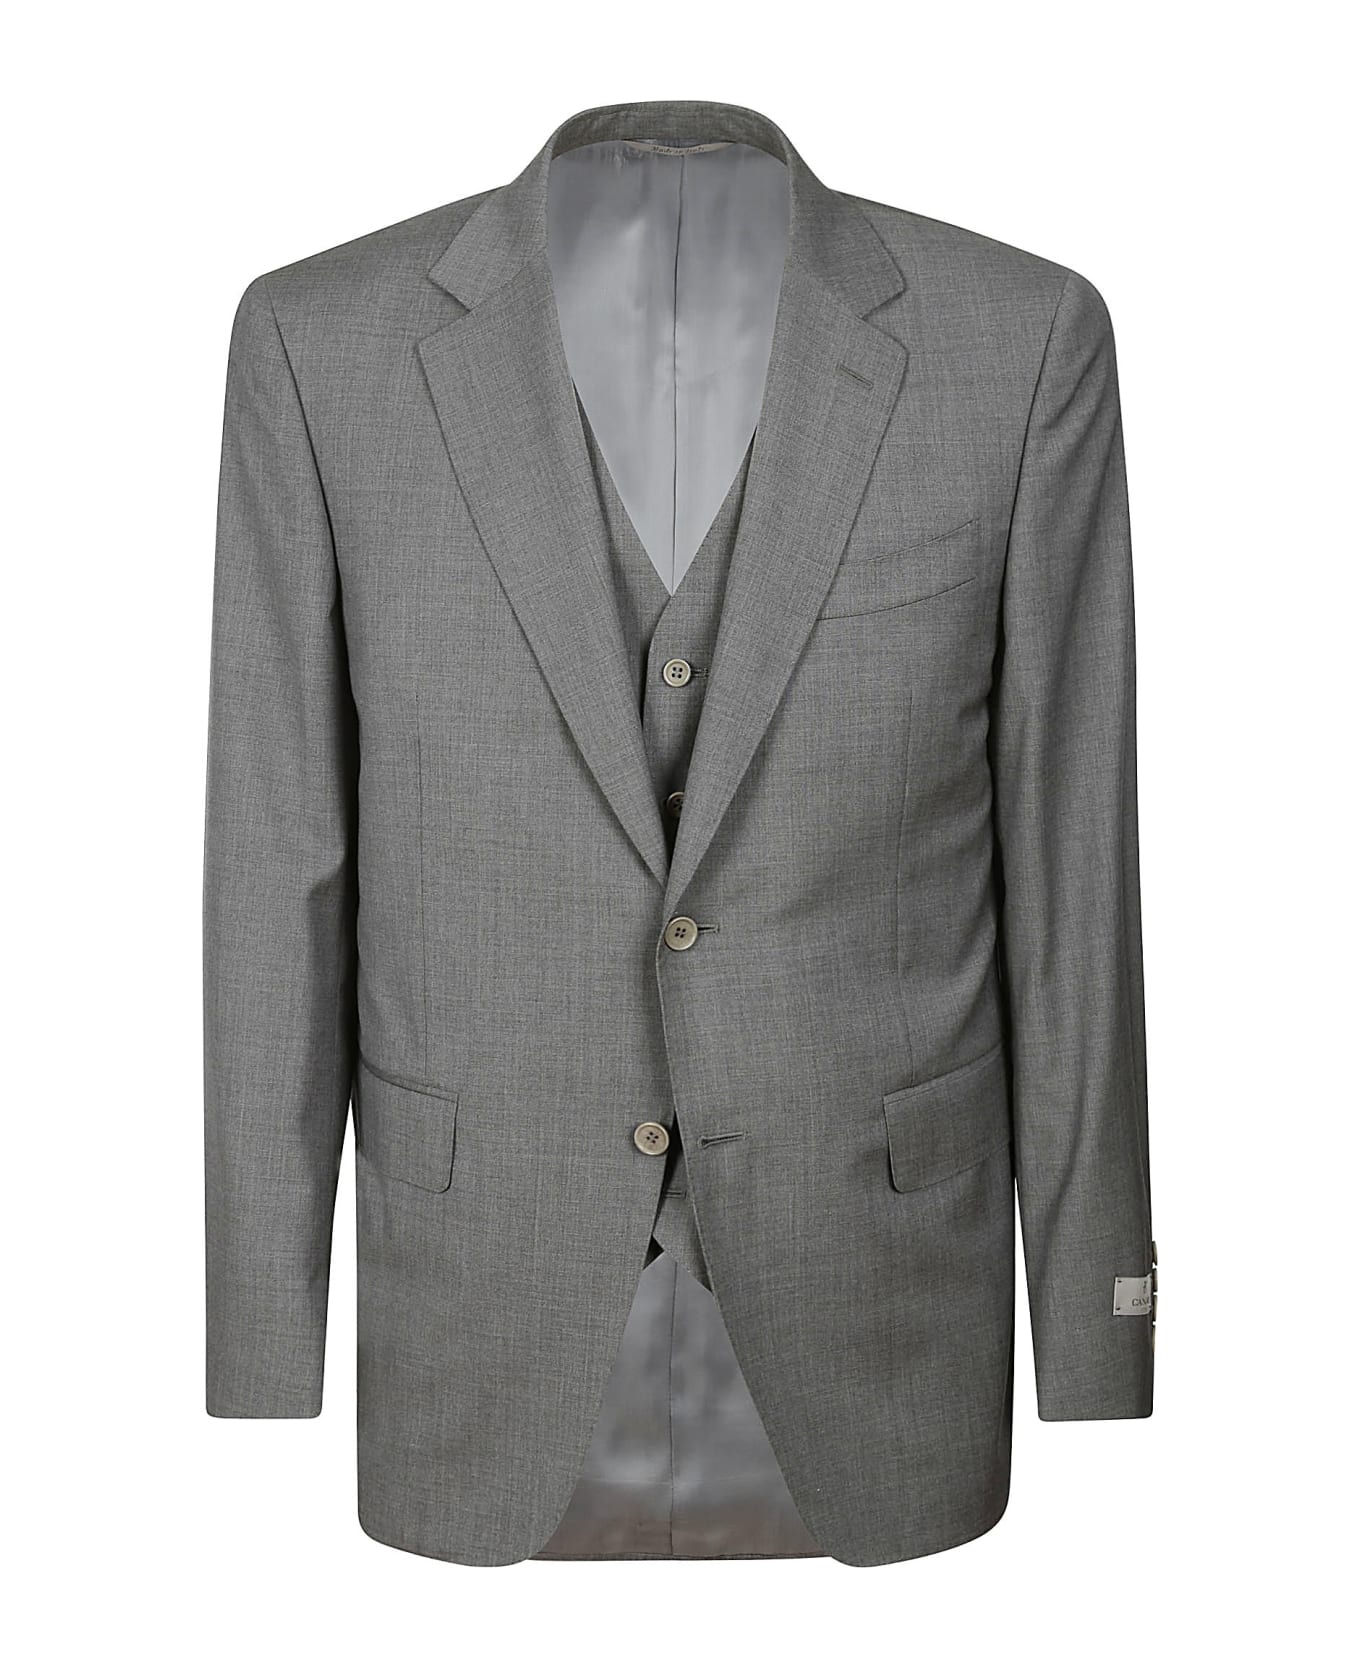 Canali Suit With Vest - Grey スーツ